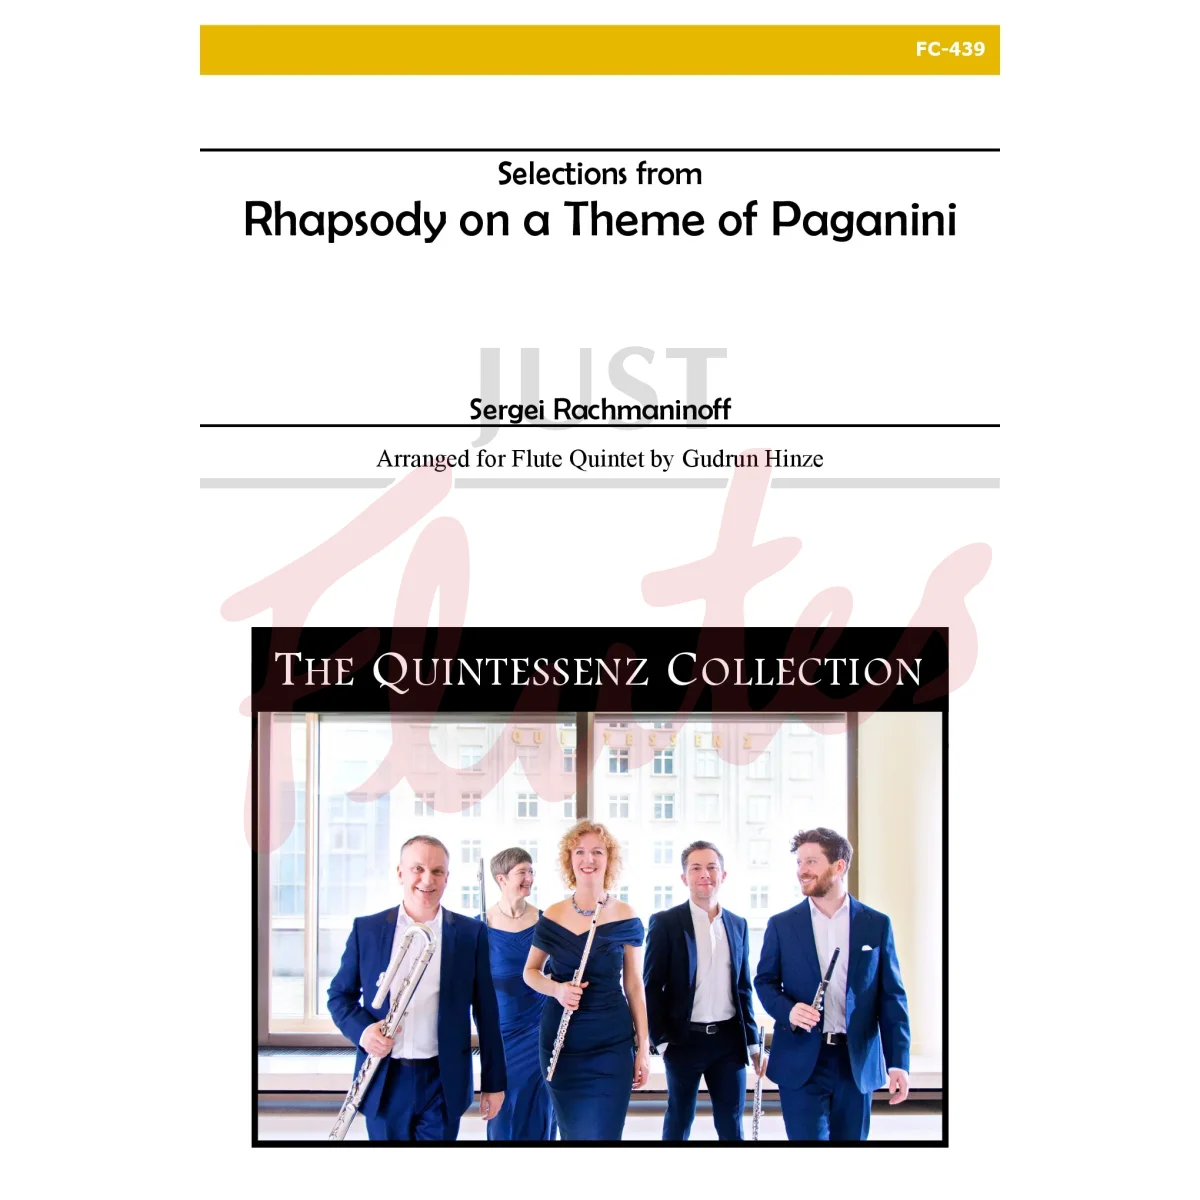 Selections from Rhapsody on a Theme of Paganini for Flute Quintet